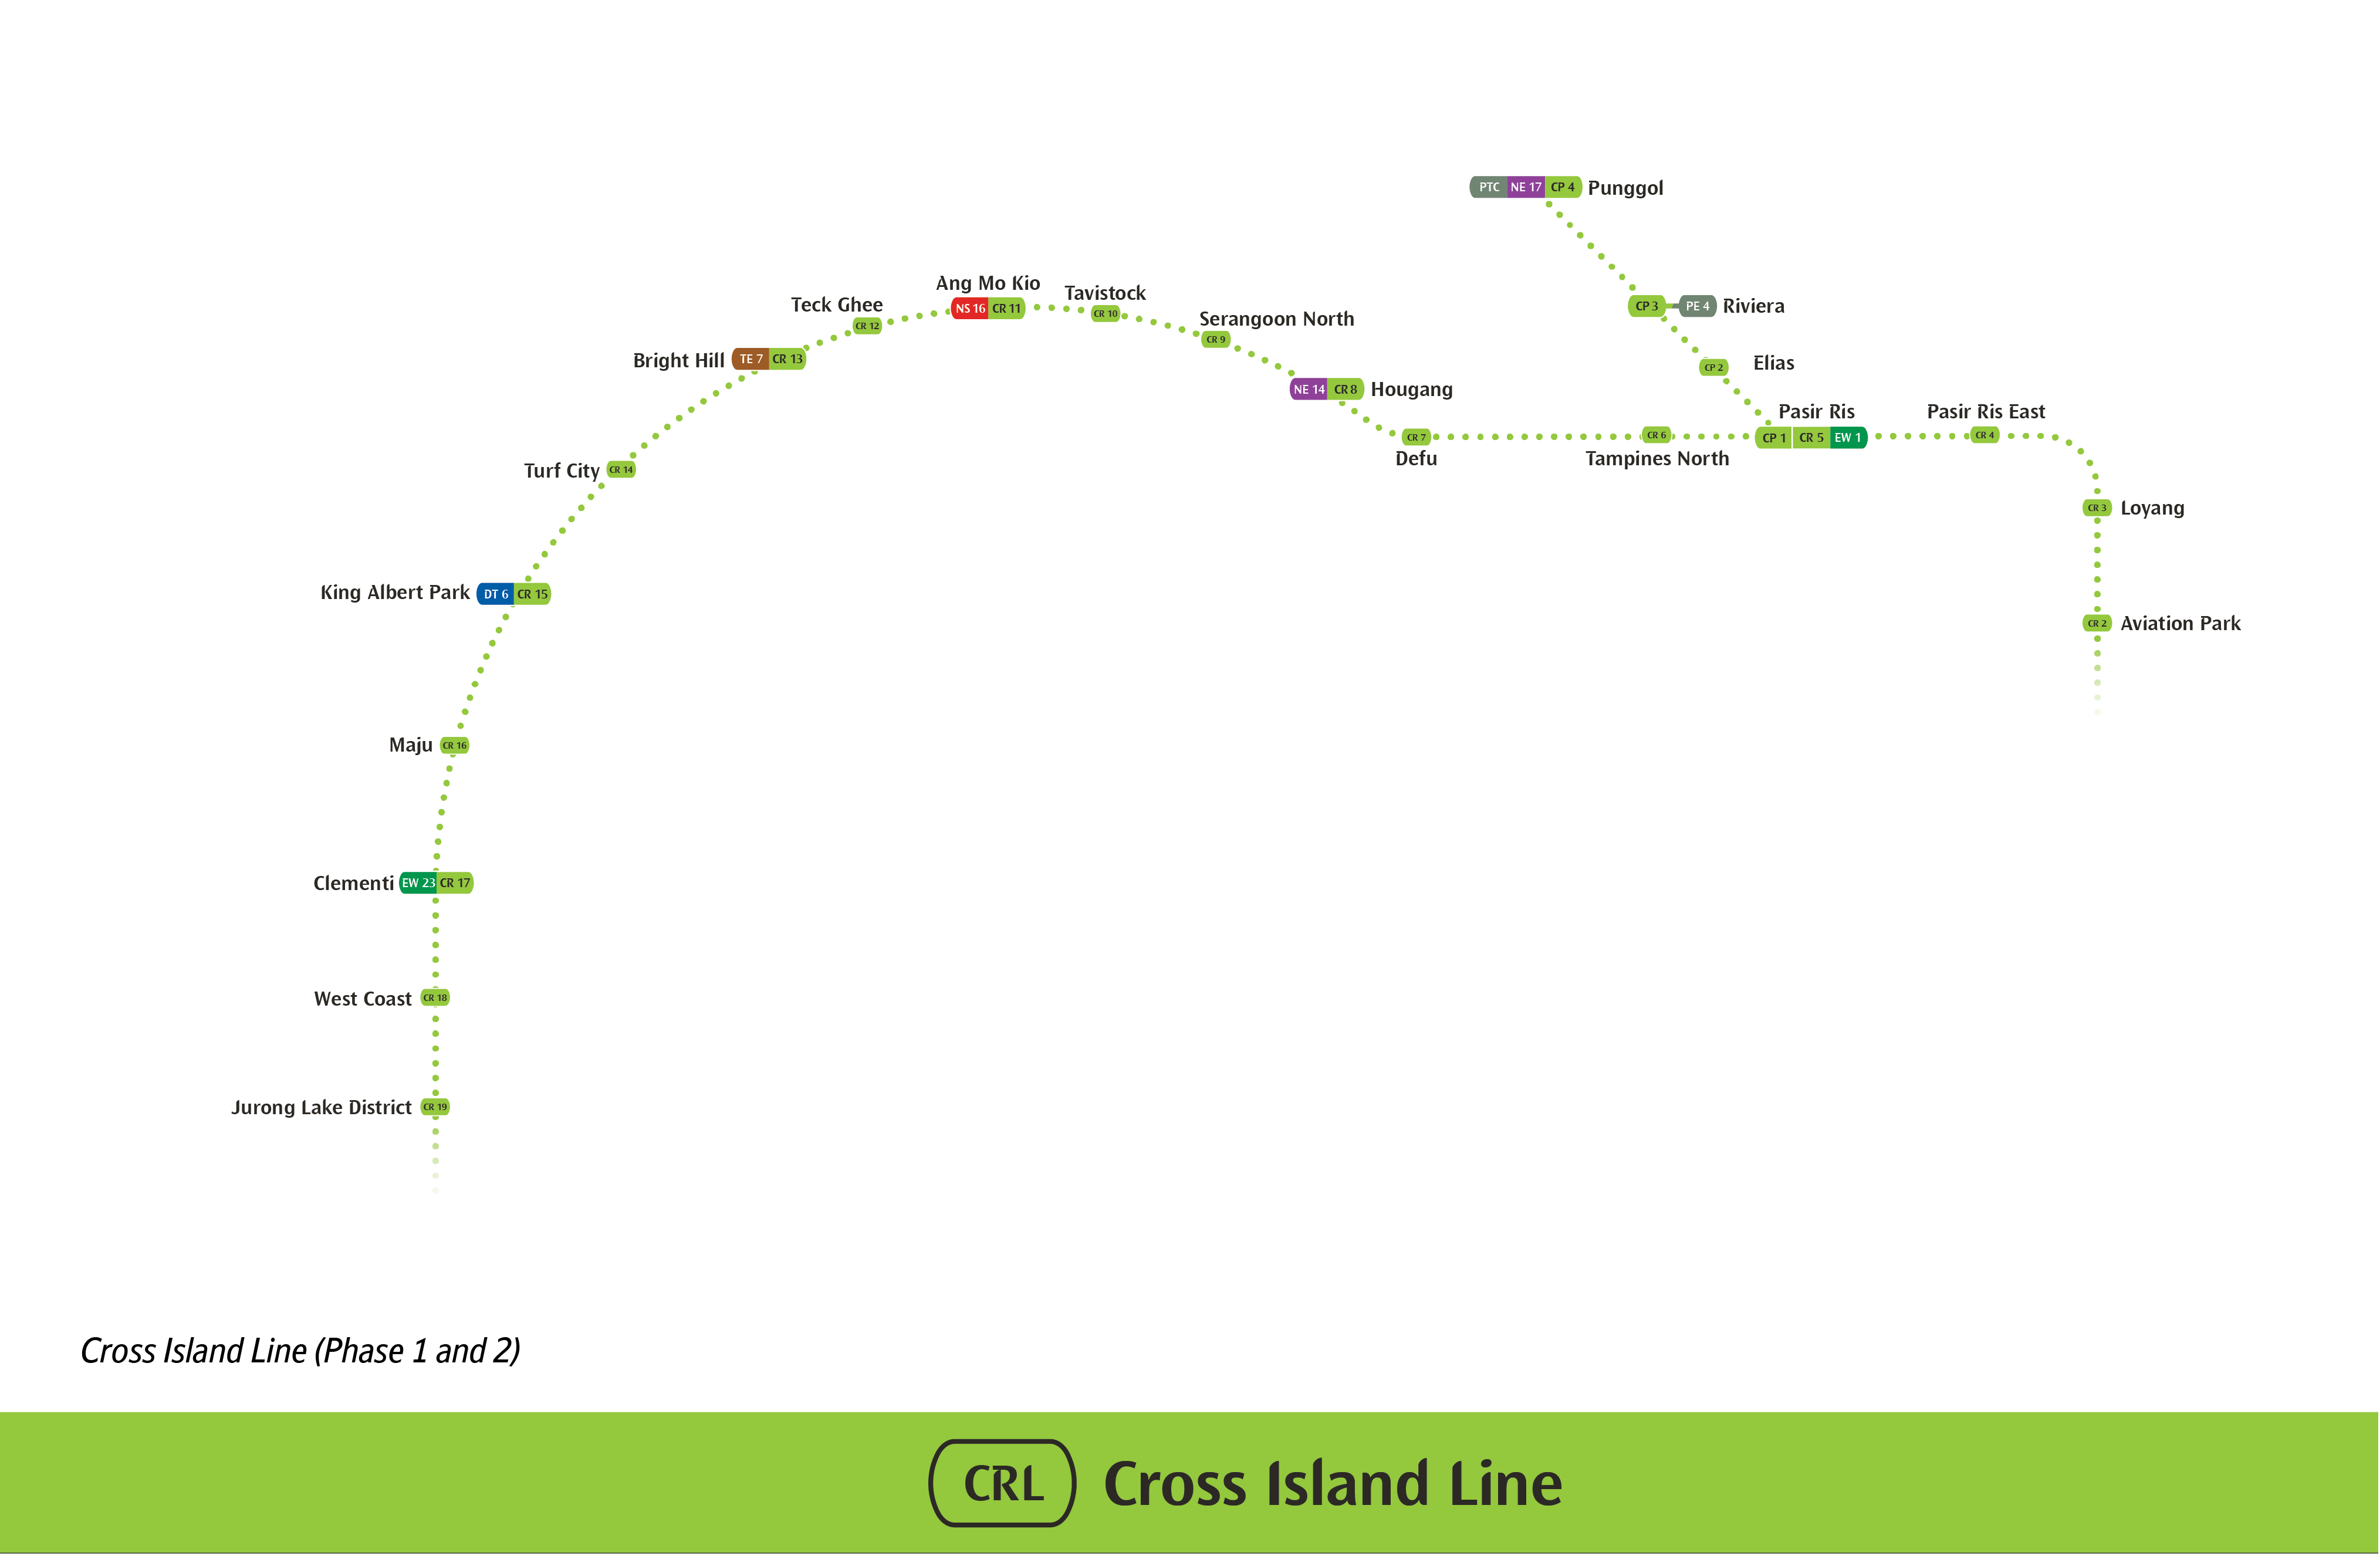 Map of Cross Island Line Phase 1 & 2